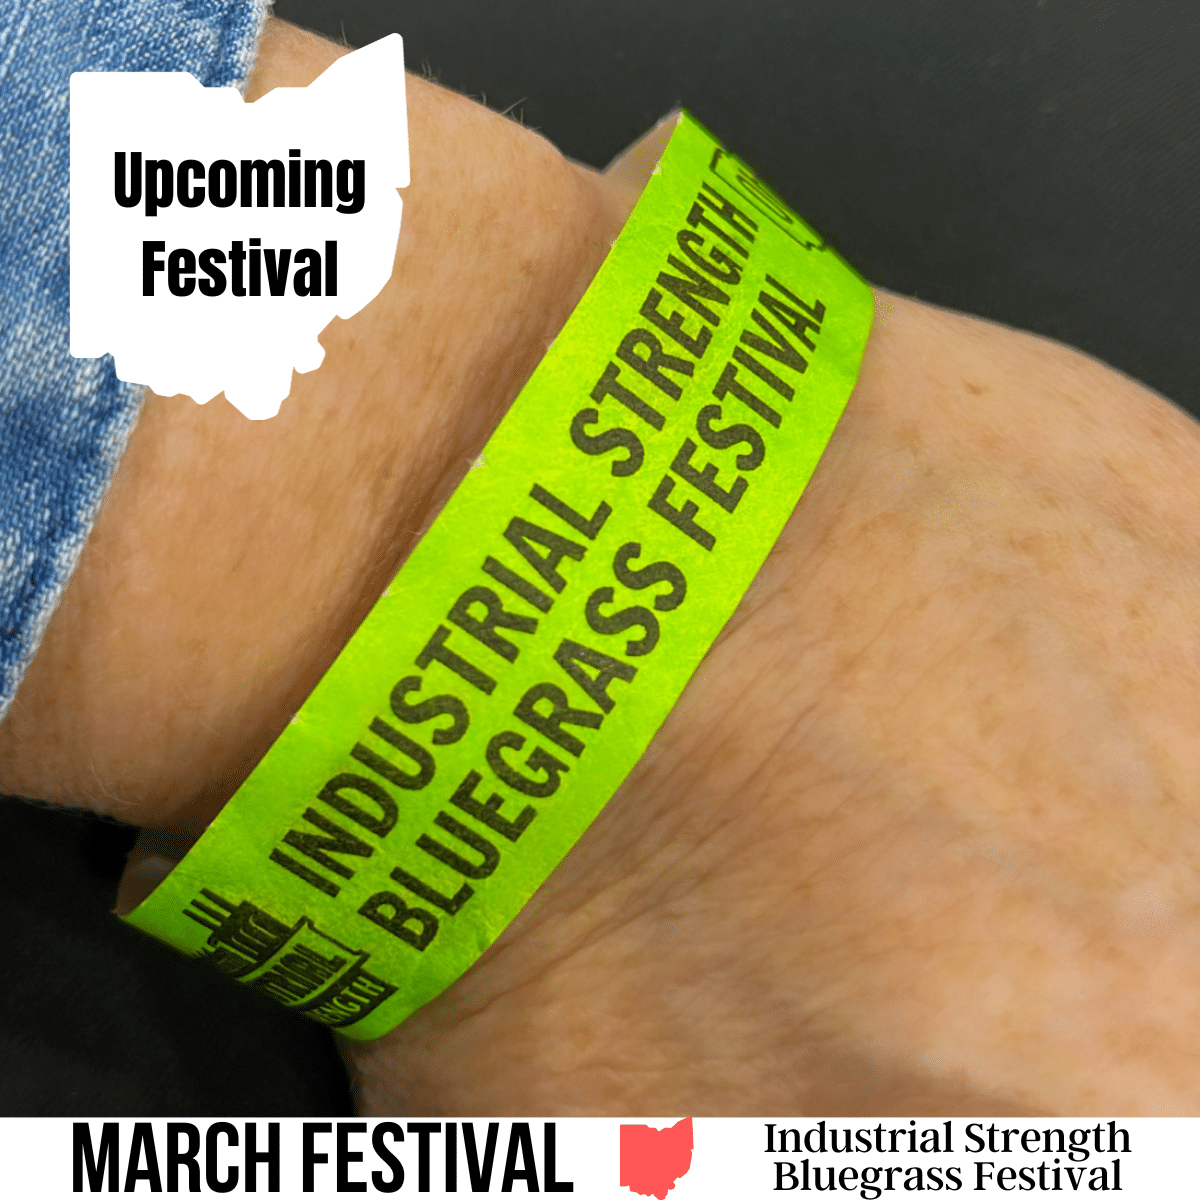 A square image with a photo of a neon green wristband around a person's wrist that has text Industrial Strength Bluegrass Festival. A white image of Ohio has text Upcoming Festival. A white strip across the bottom has text March Festival Industrial Strength Bluegrass Festival